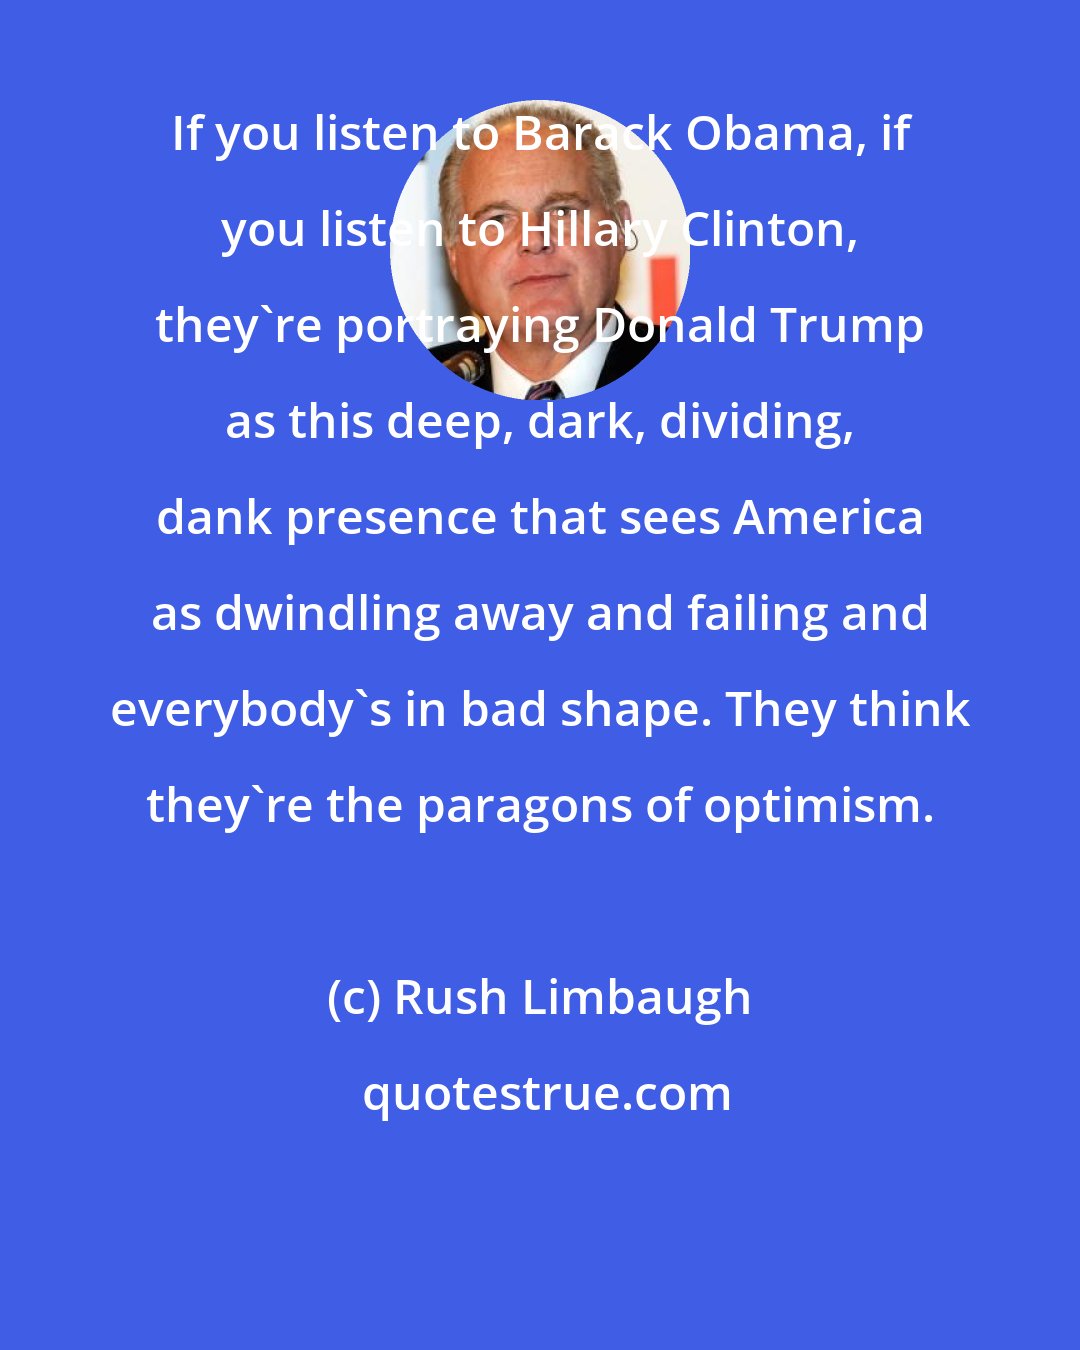 Rush Limbaugh: If you listen to Barack Obama, if you listen to Hillary Clinton, they're portraying Donald Trump as this deep, dark, dividing, dank presence that sees America as dwindling away and failing and everybody's in bad shape. They think they're the paragons of optimism.